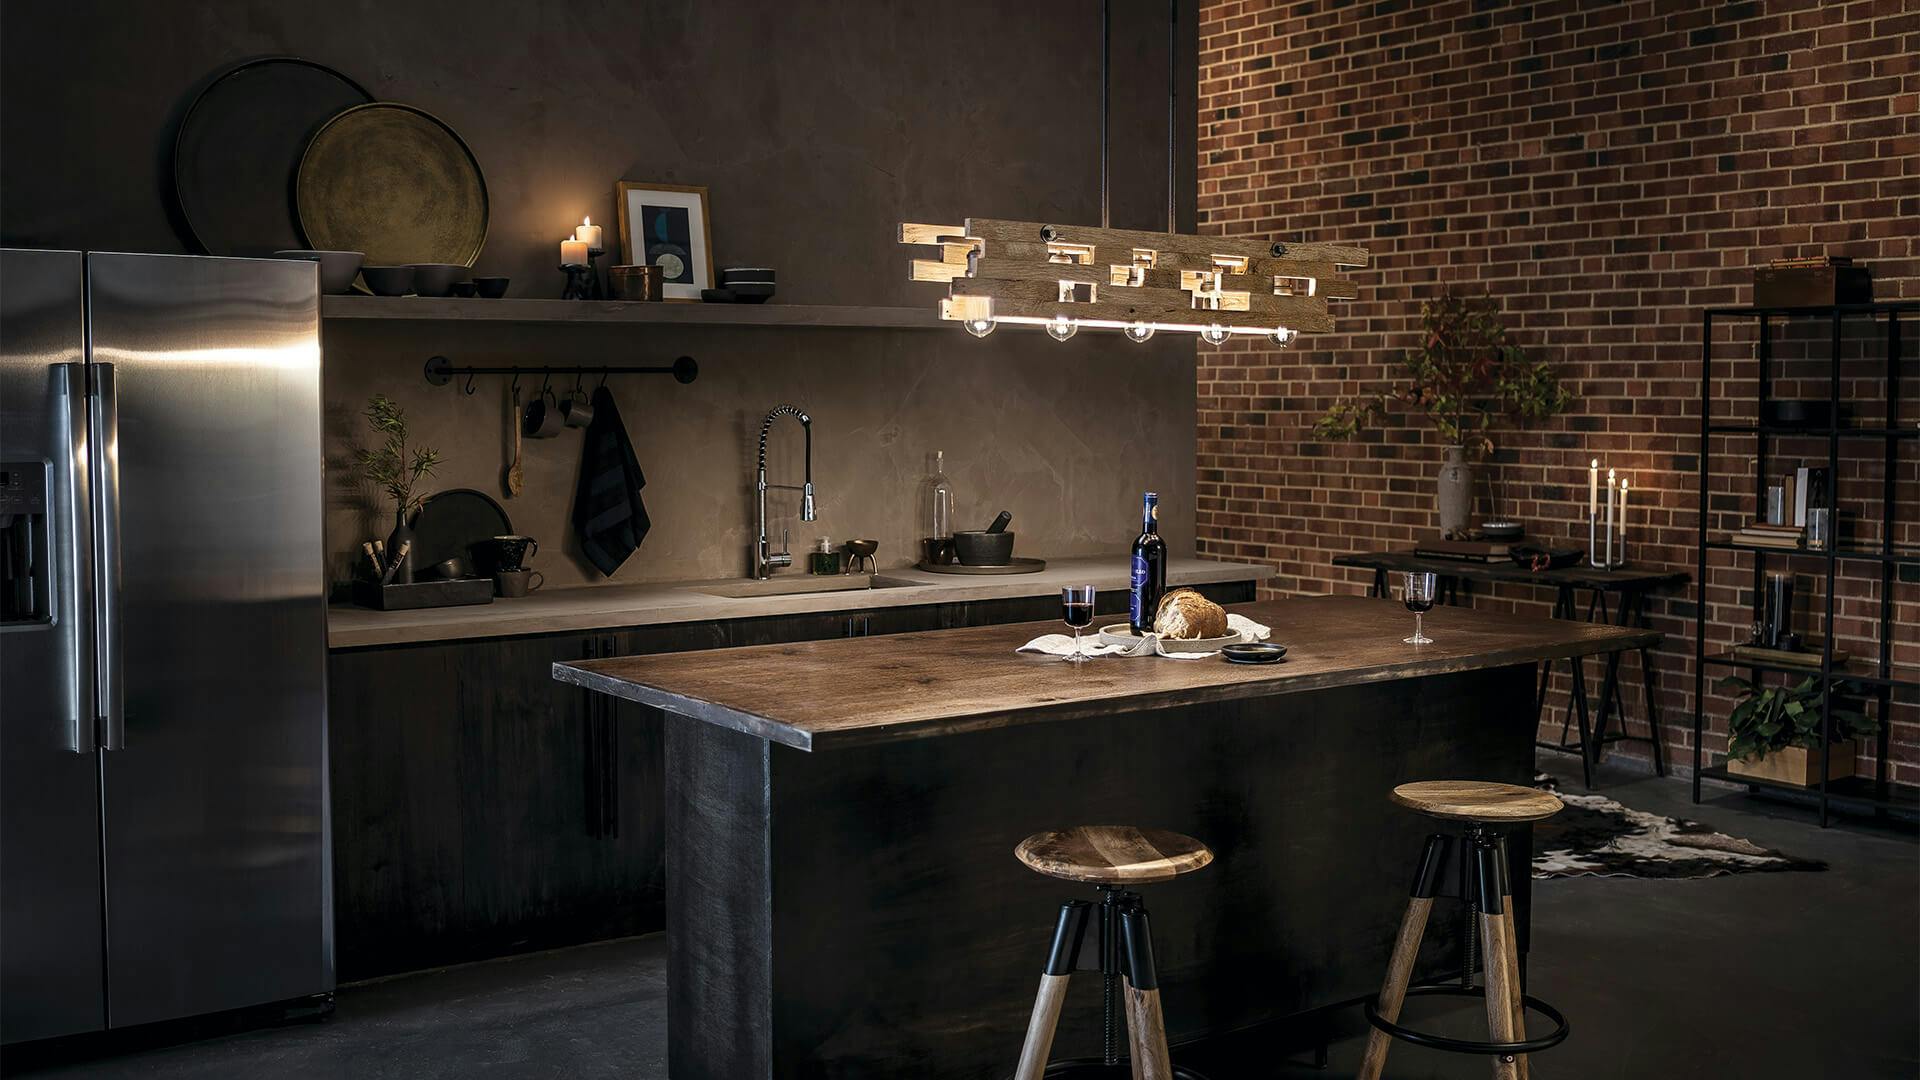 Indoor kitchen bar, industrial style with warm lights.